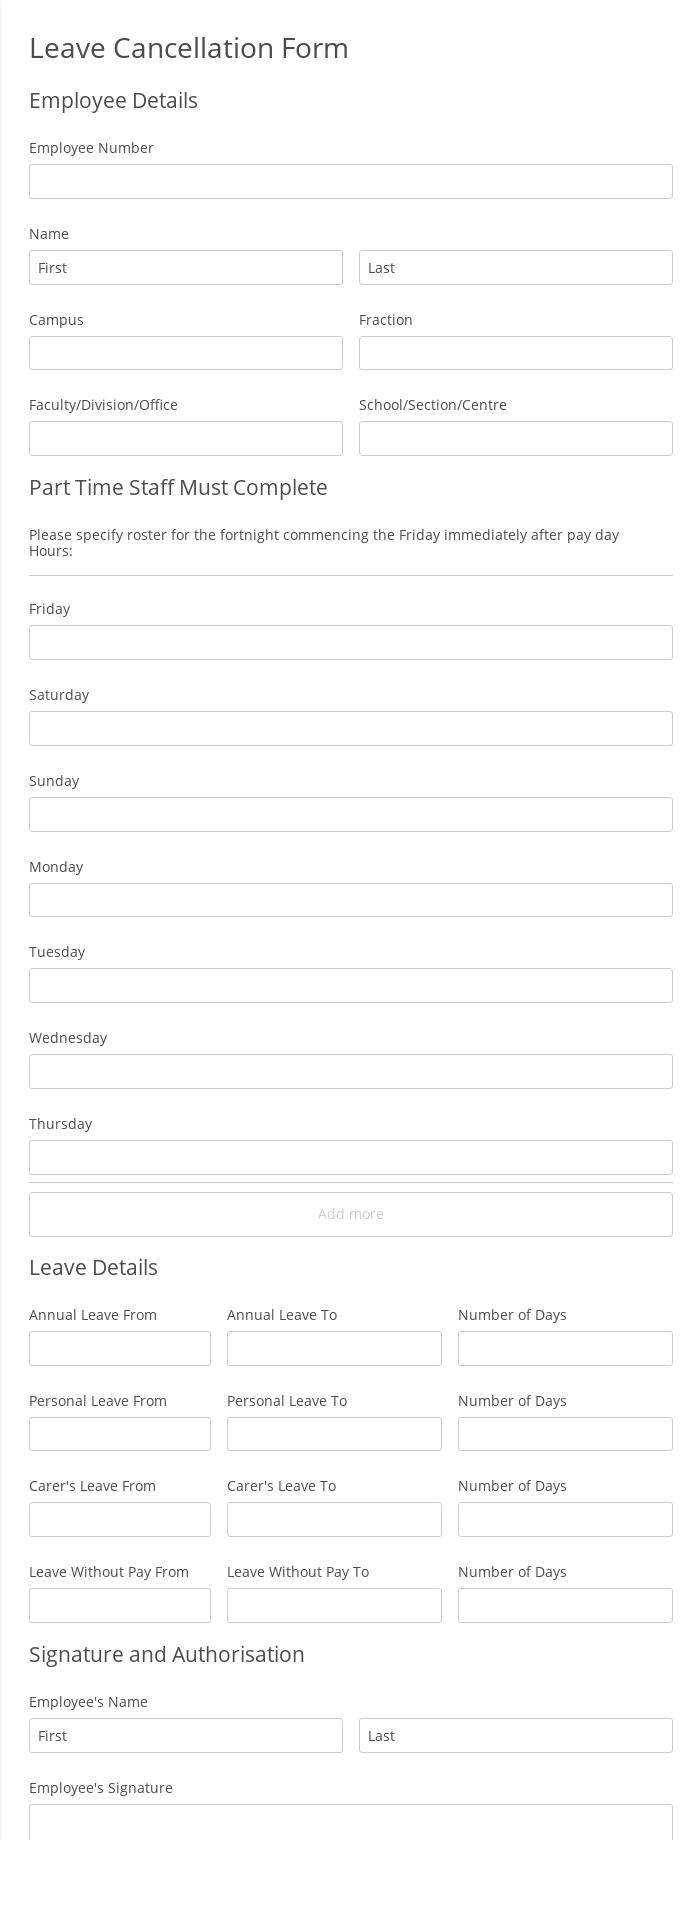 Leave Cancellation Form